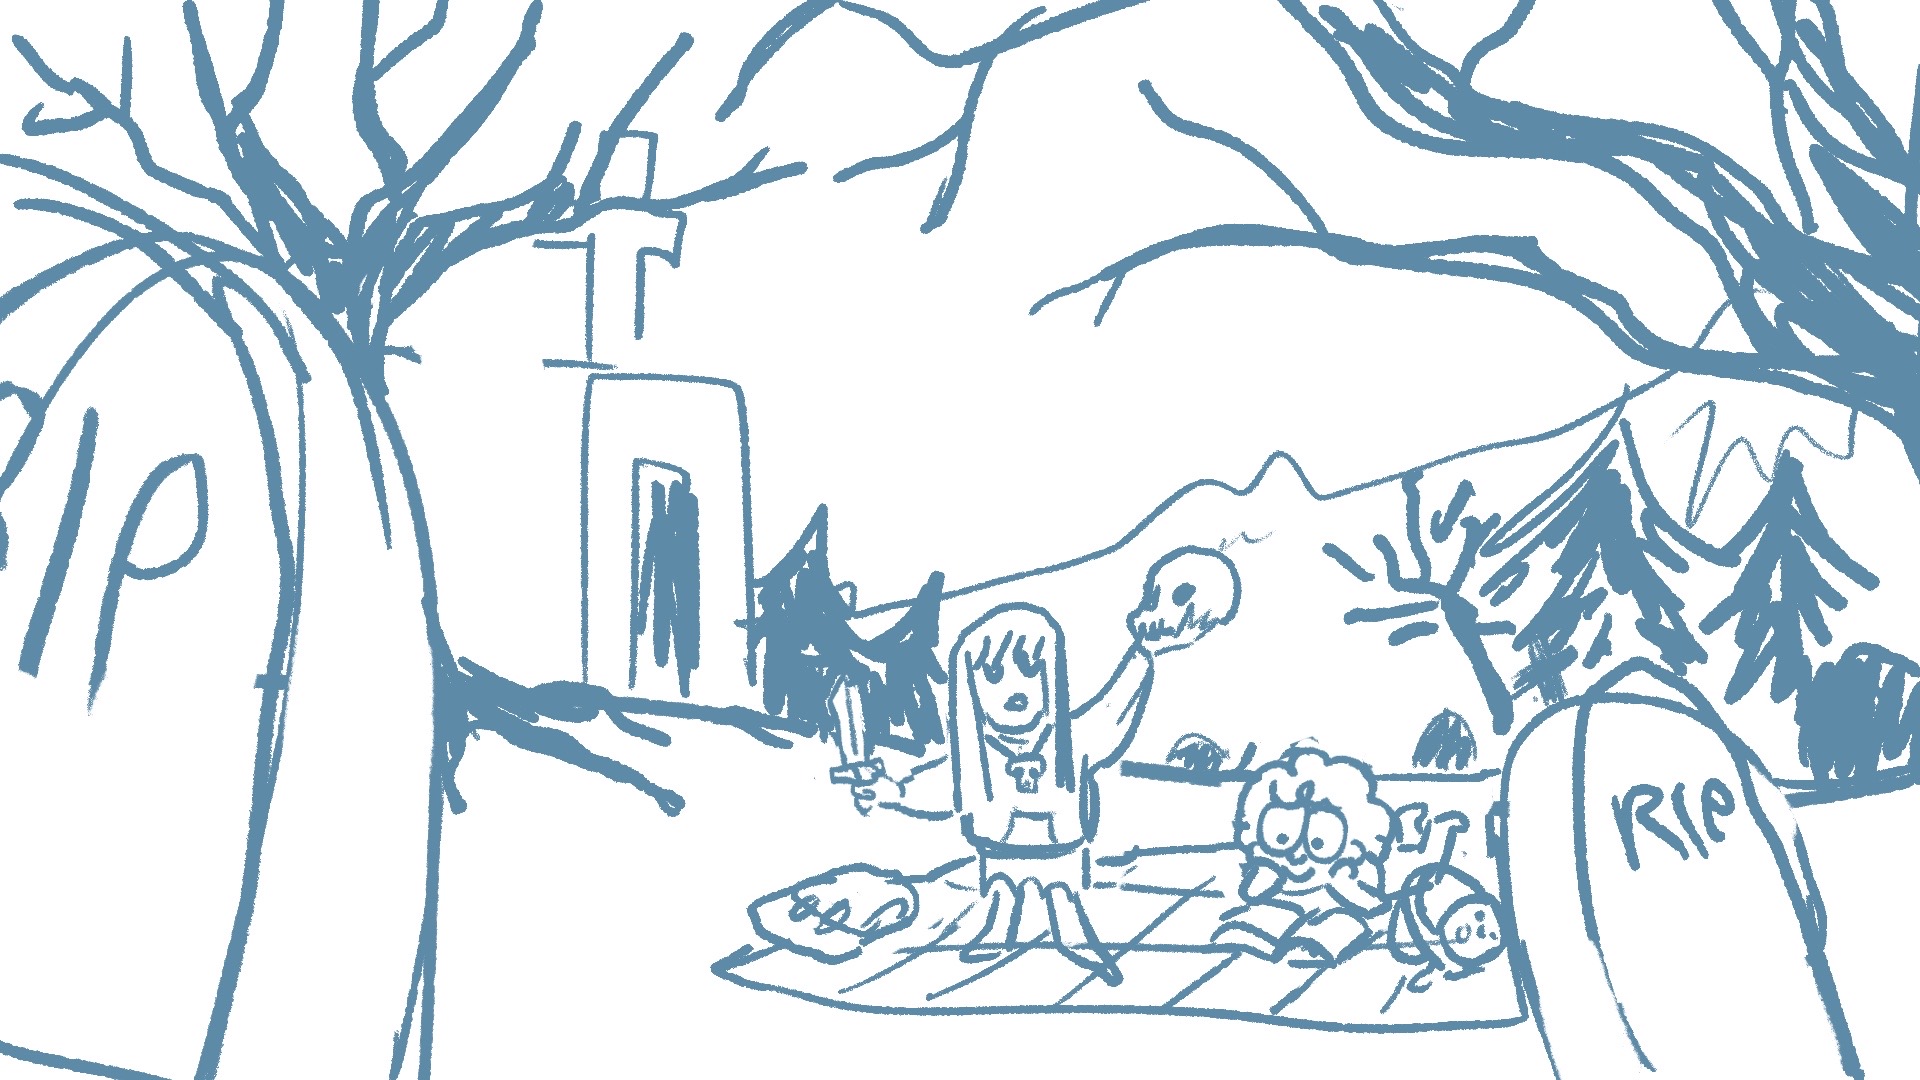 Amiria and Ena having a picnic in the graveyard. Amiria is reading a thick book while Ena holds a skull and dagger and reciting Shakespeare.